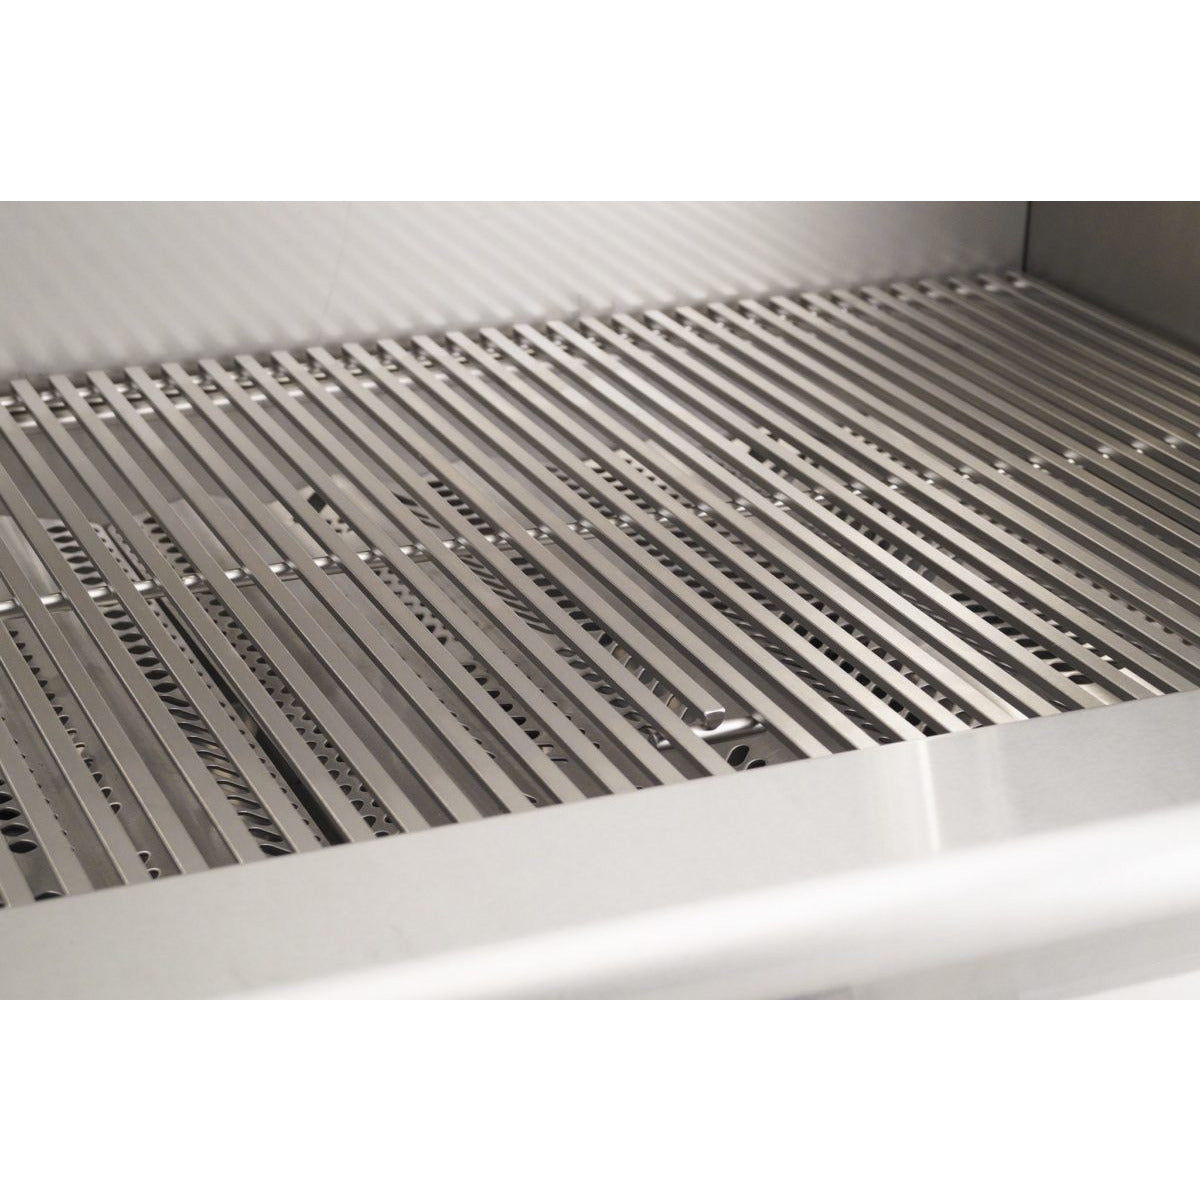 American Outdoor Grill 36'' L Series Built-in Gas Grills 36NBL